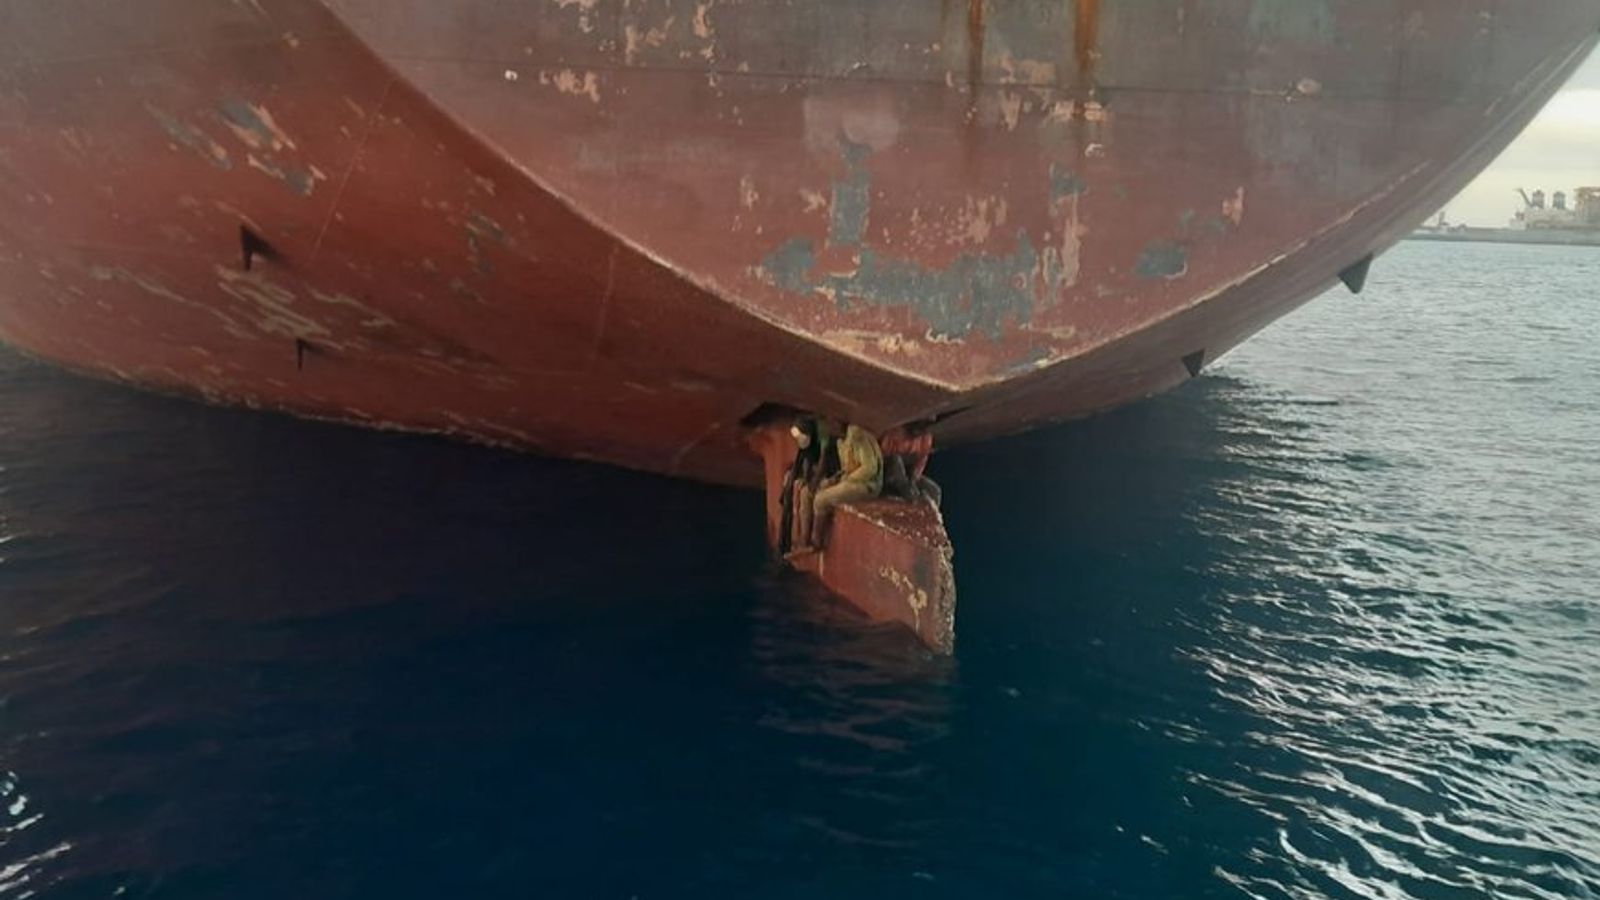 Shocking picture shows three stowaways rescued after spending 11 days on rudder of oil tanker